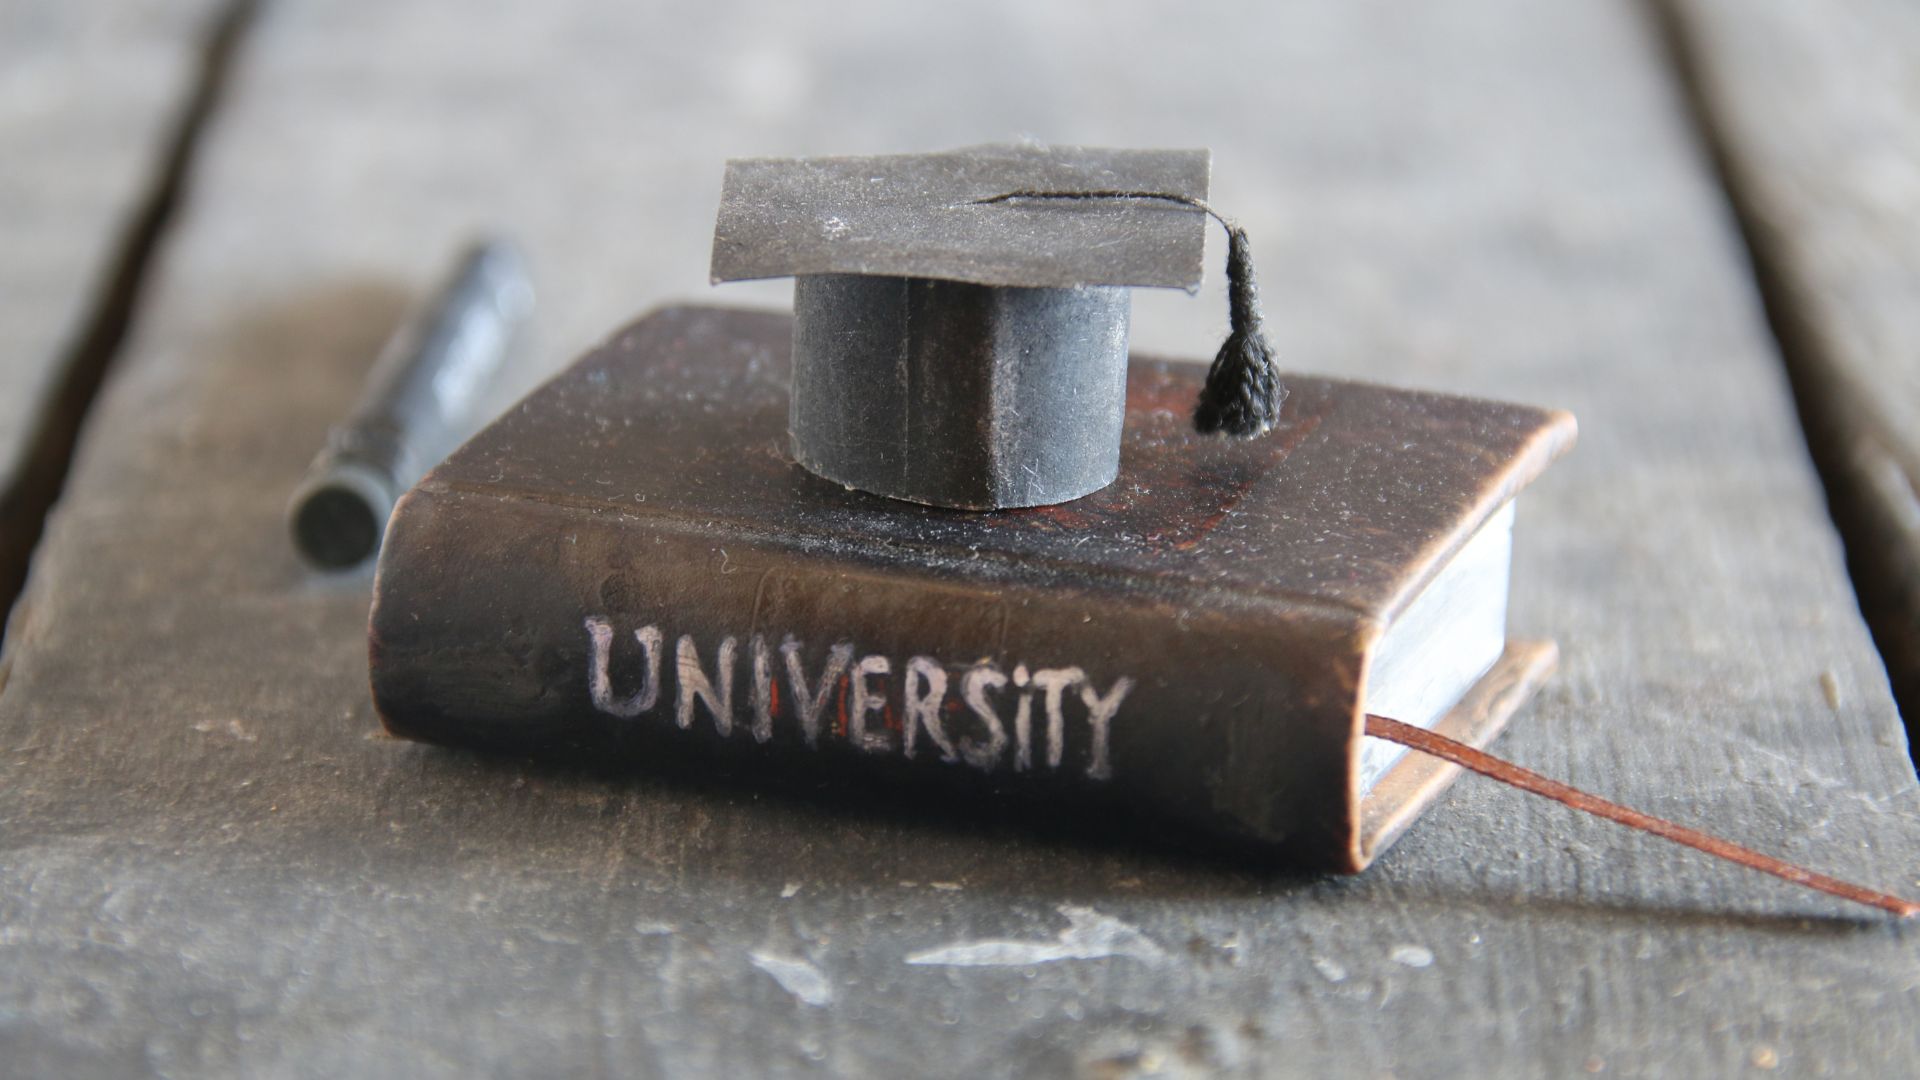 really cool miniature version of a university school book and graduation cap on a table